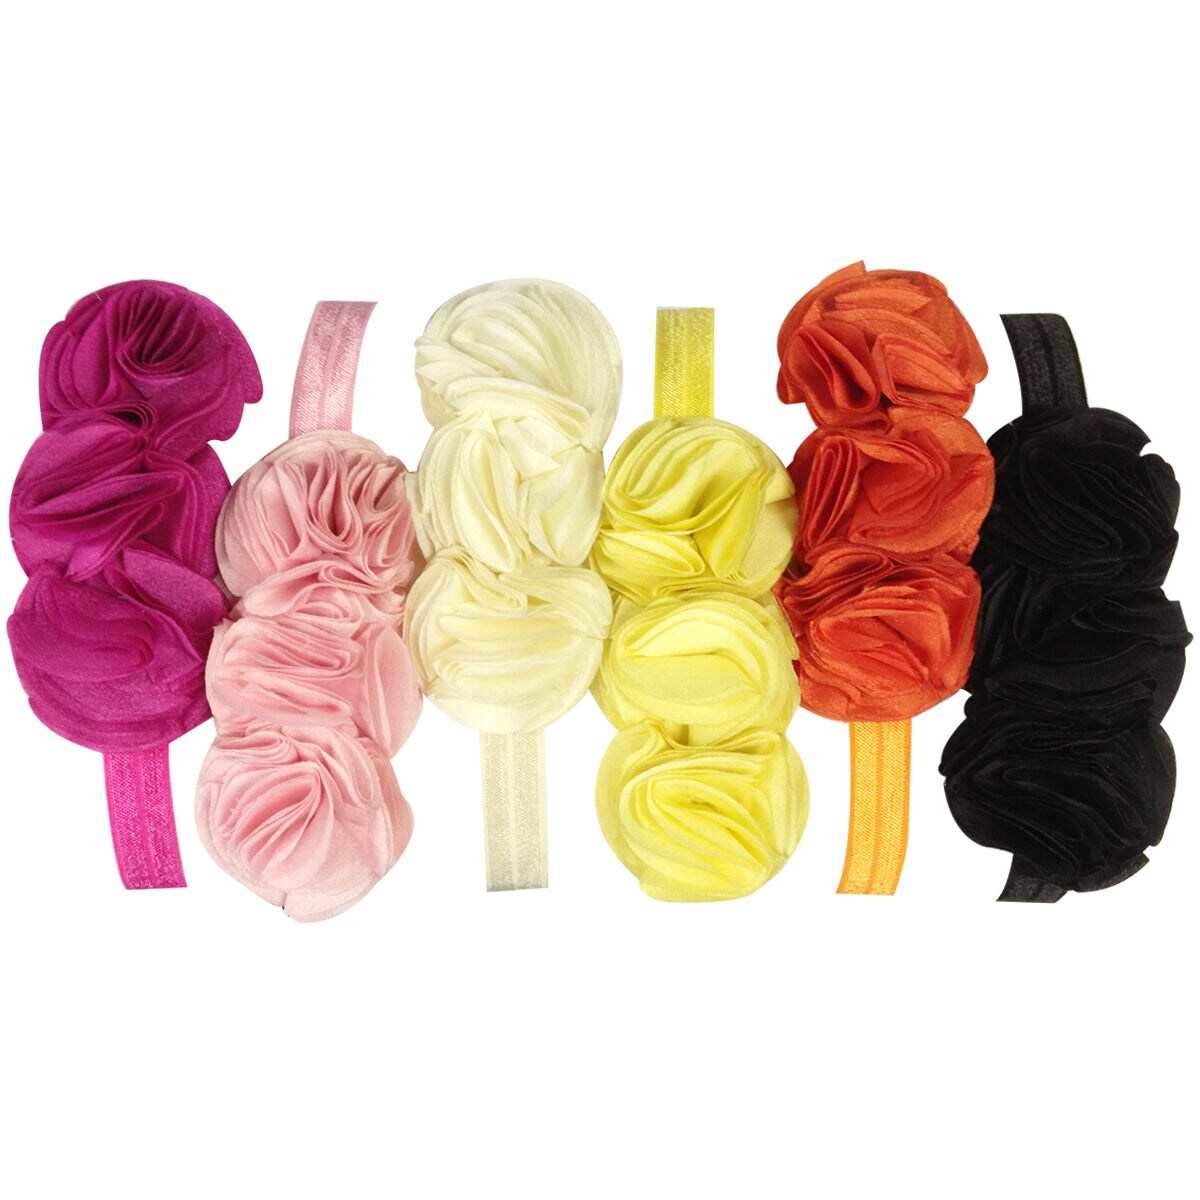 Wrapables Set of 6 Assorted Polyester Triple Florets Baby Headbands